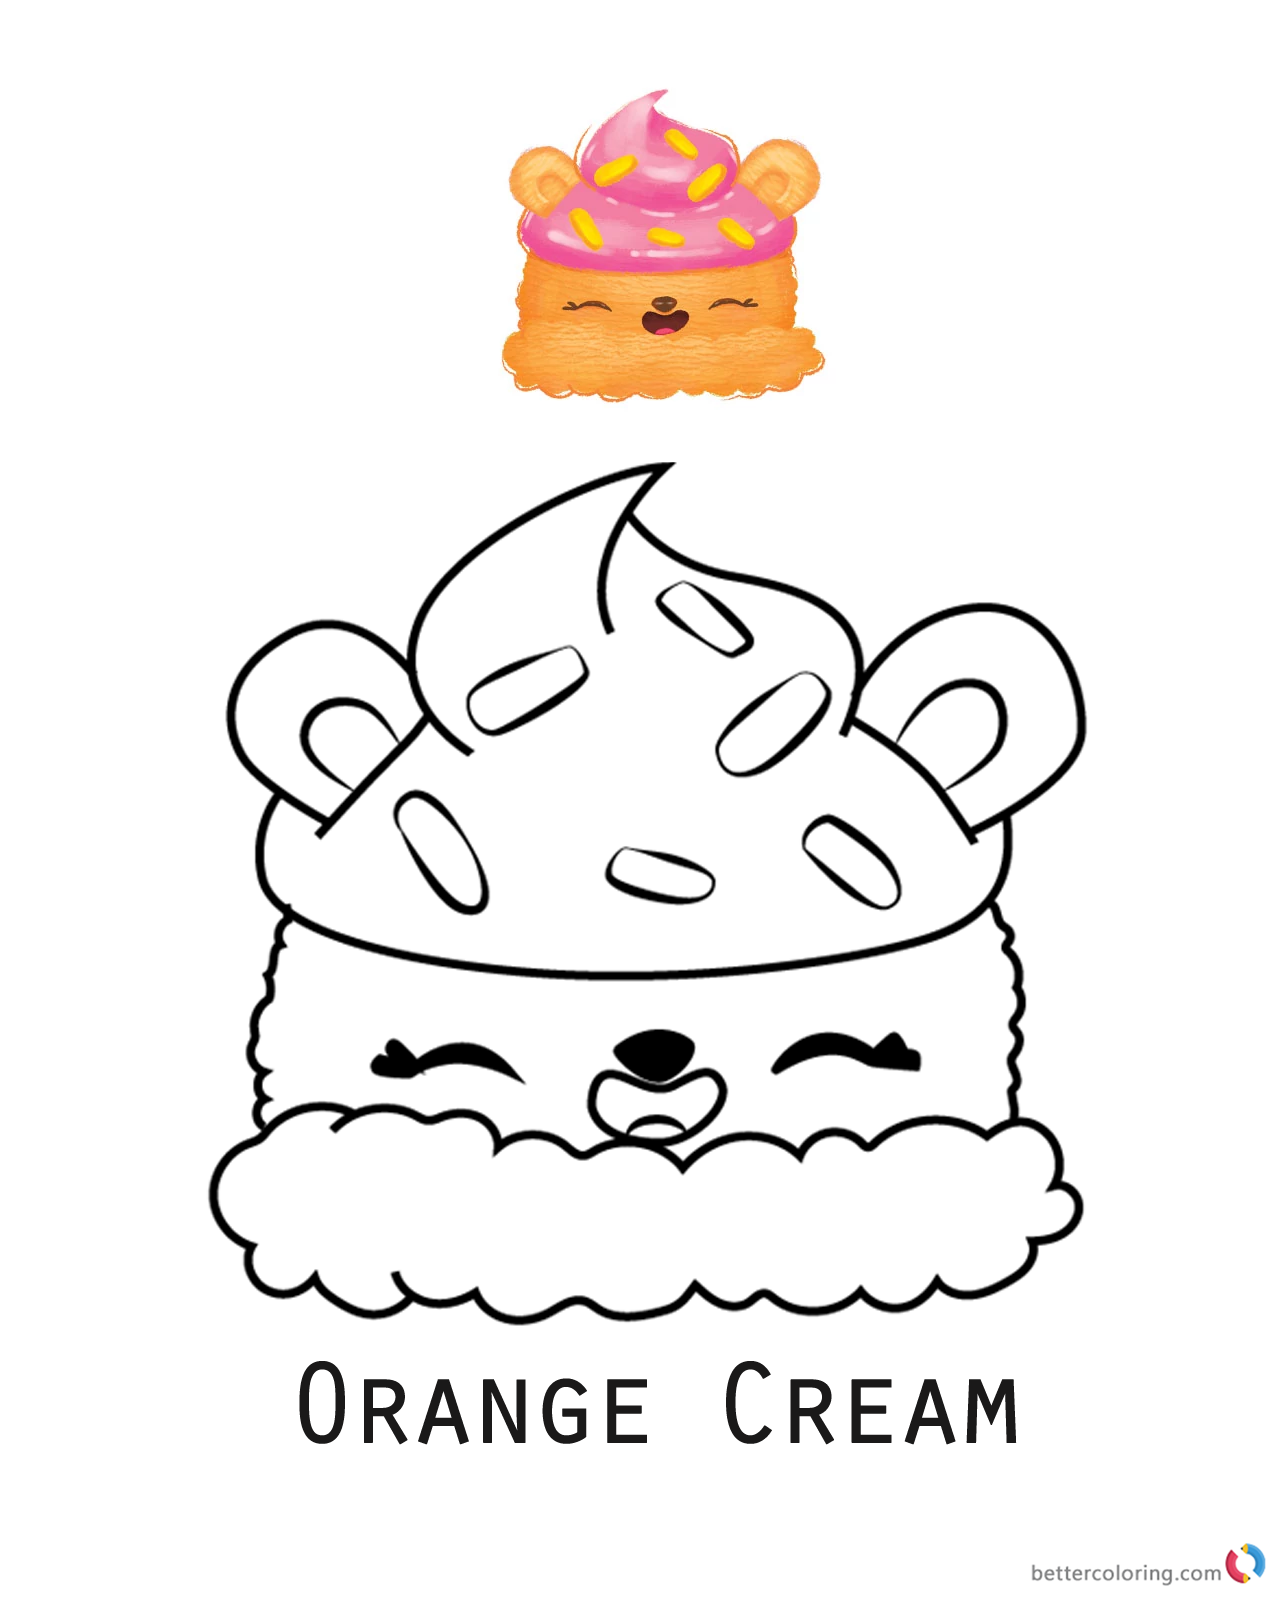 Orange Cream from Num Noms coloring pages printable